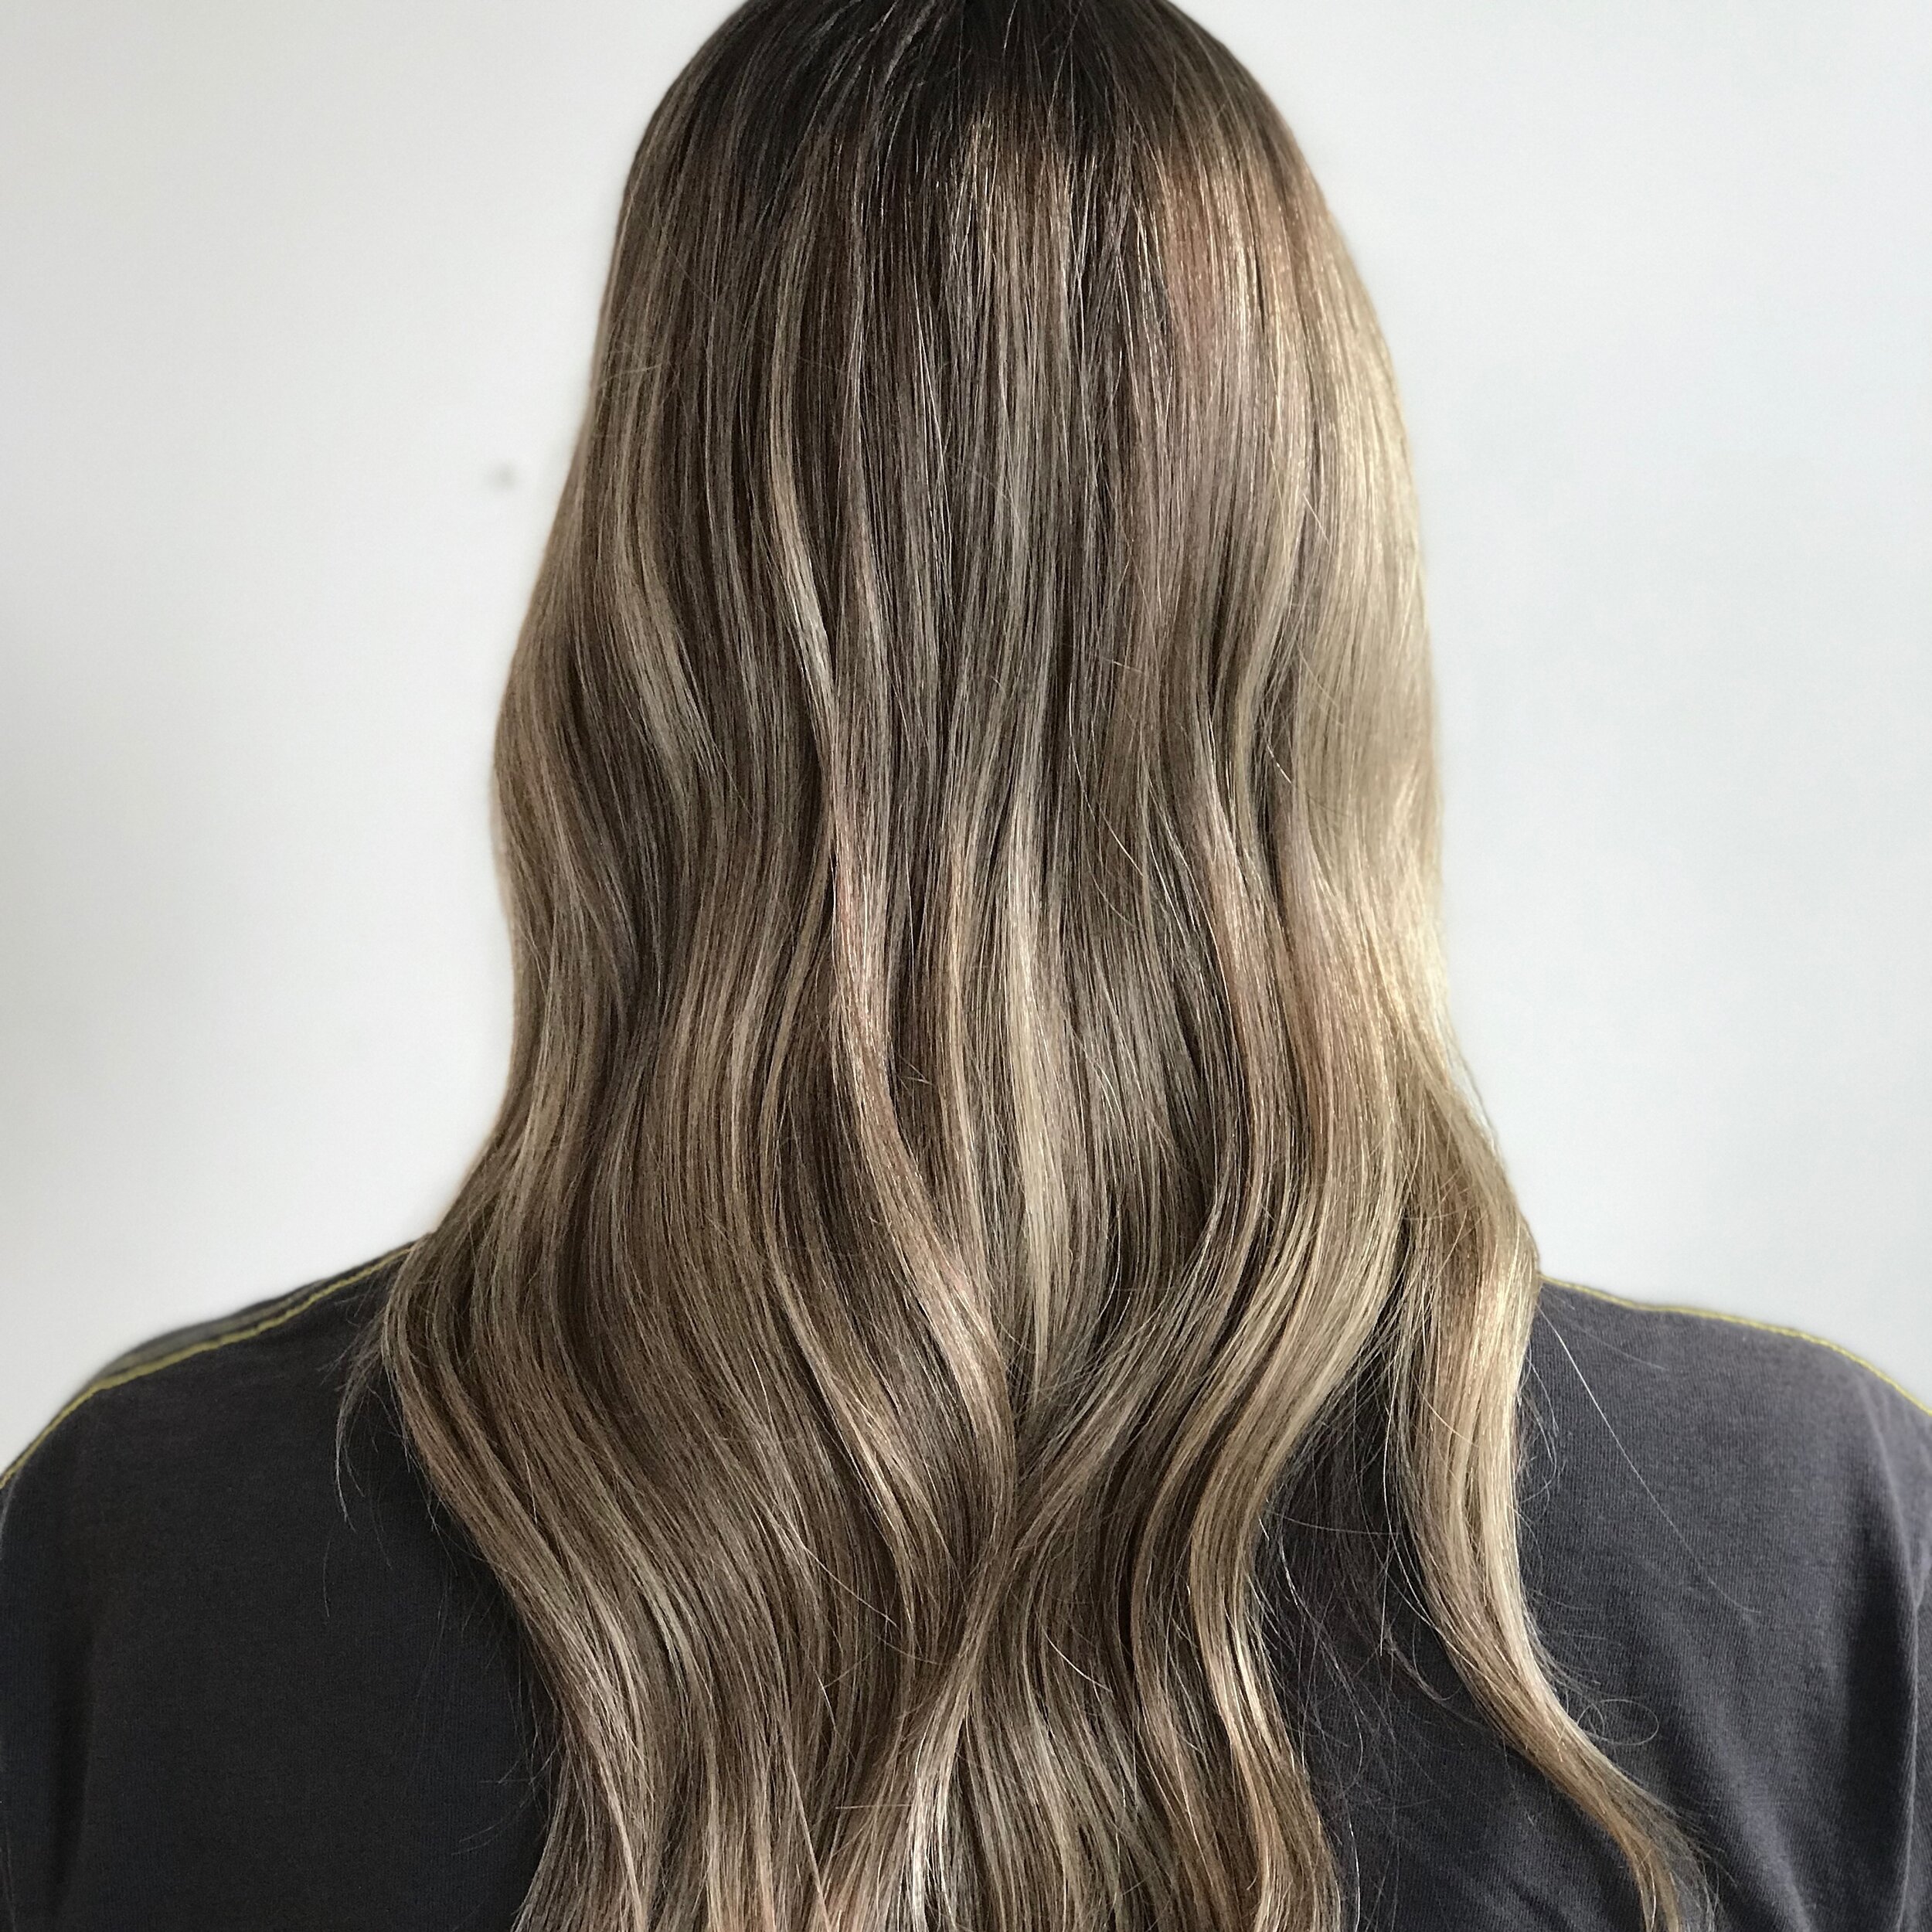 If formulated correctly, blonding won&rsquo;t leave your hair dry, feeling &ldquo;too blonde&rdquo;, and can even be shinier and softer than when we started. 

Here, Tash added low dimension babylights and the perfect custom bronze toner for hair tha